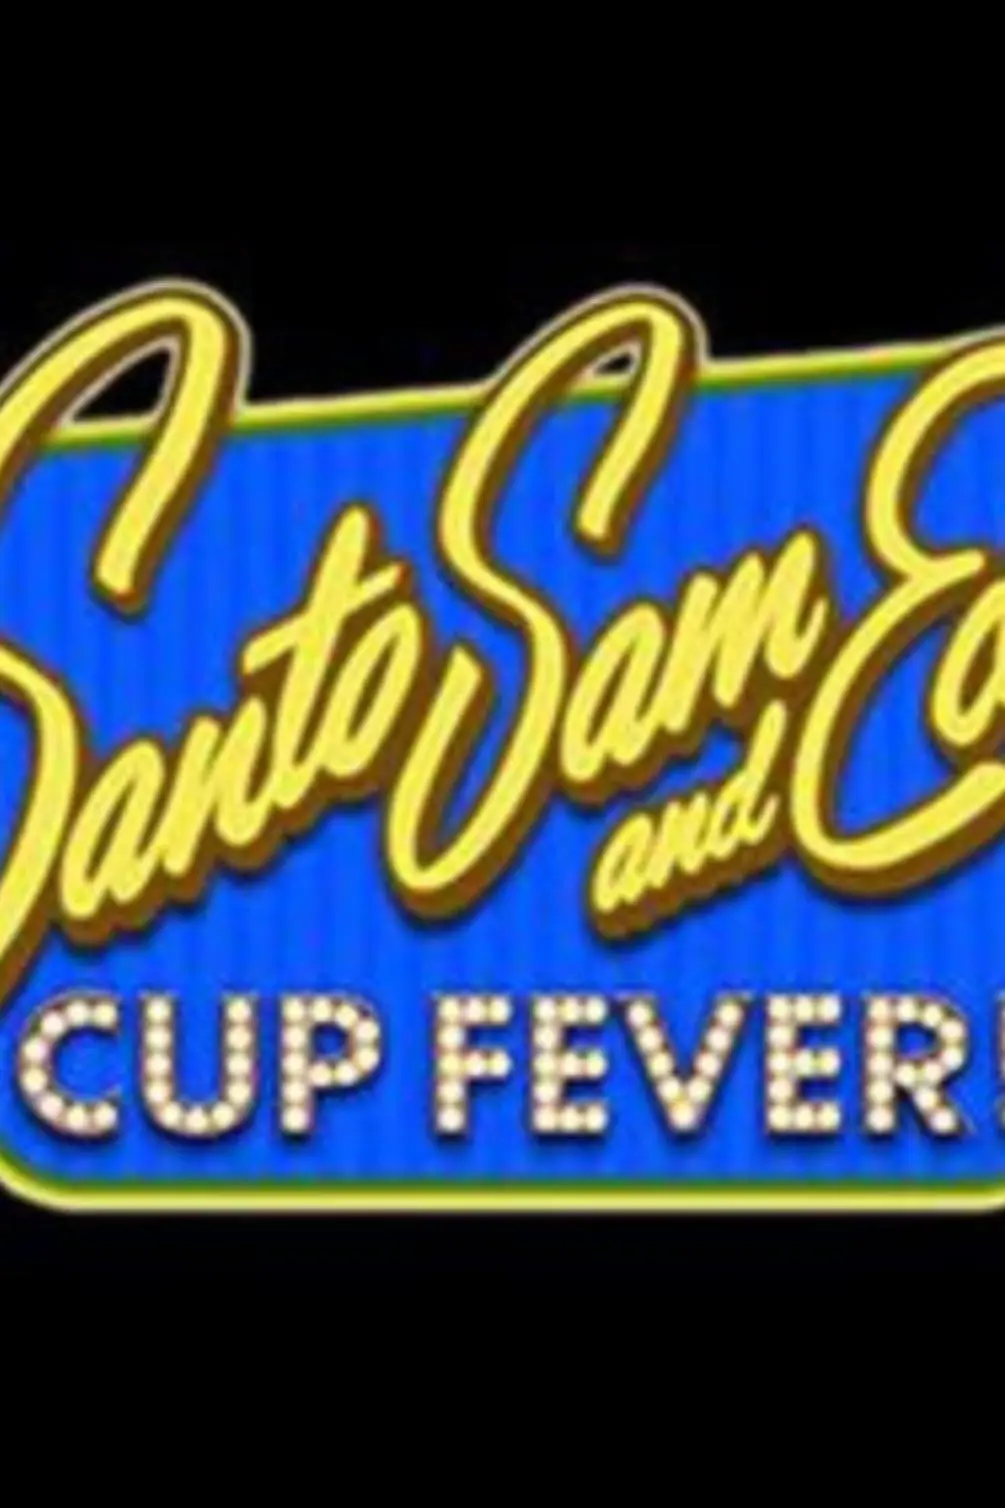 Santo, Sam and Ed's Cup Fever!_peliplat